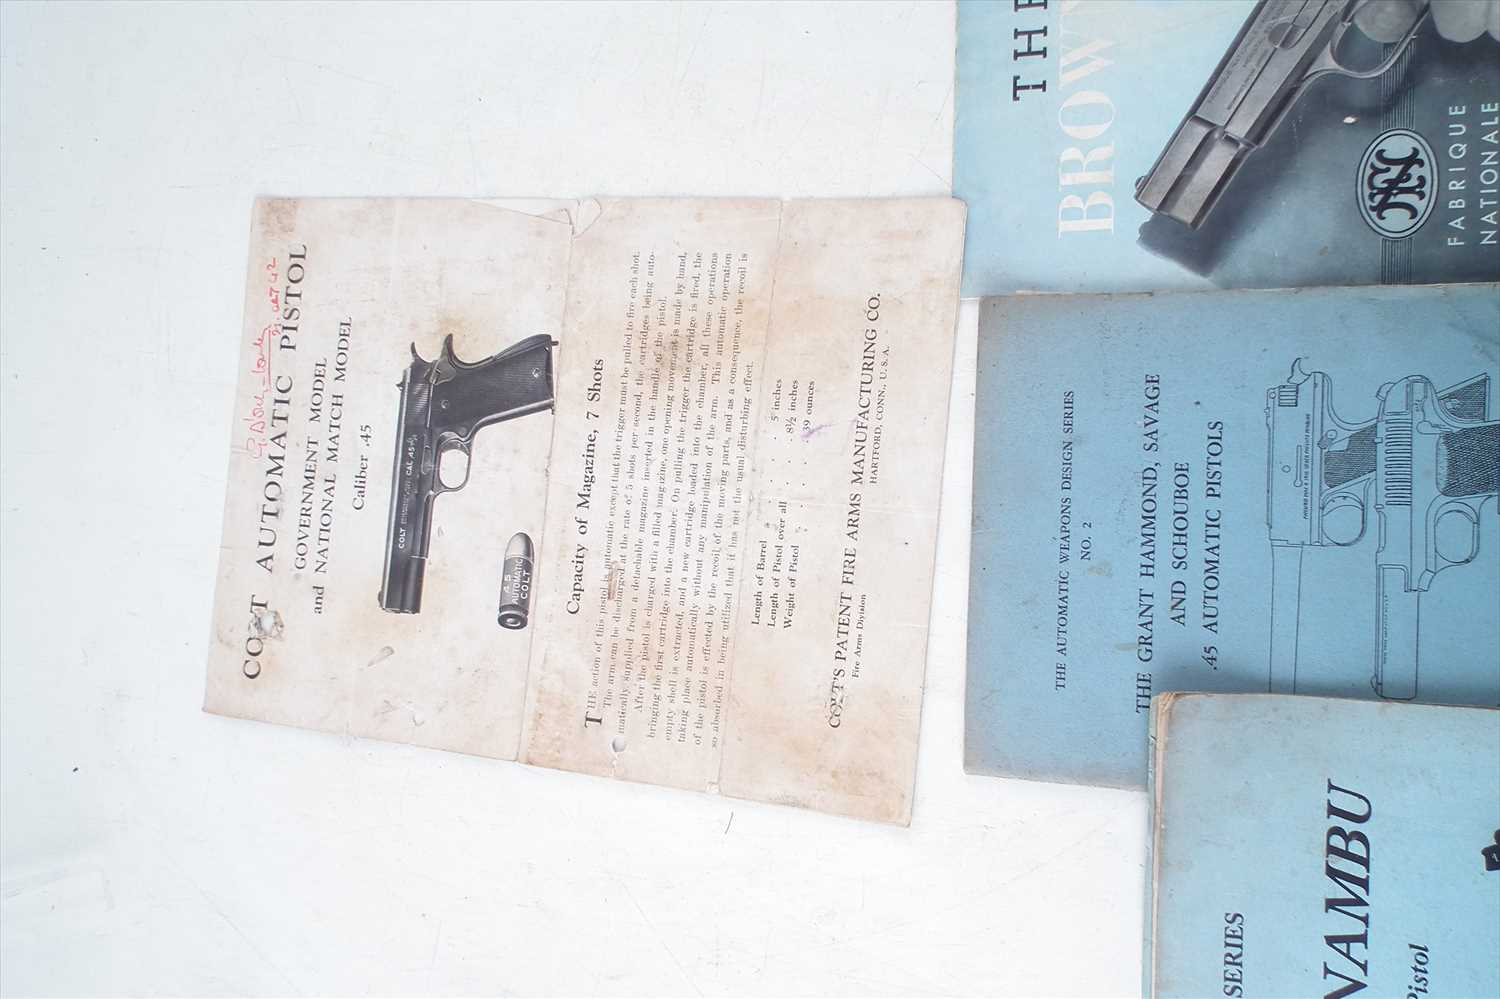 Collection of books, catalogues and pamphlets relating to pistols and pistol shooting, - Image 6 of 6